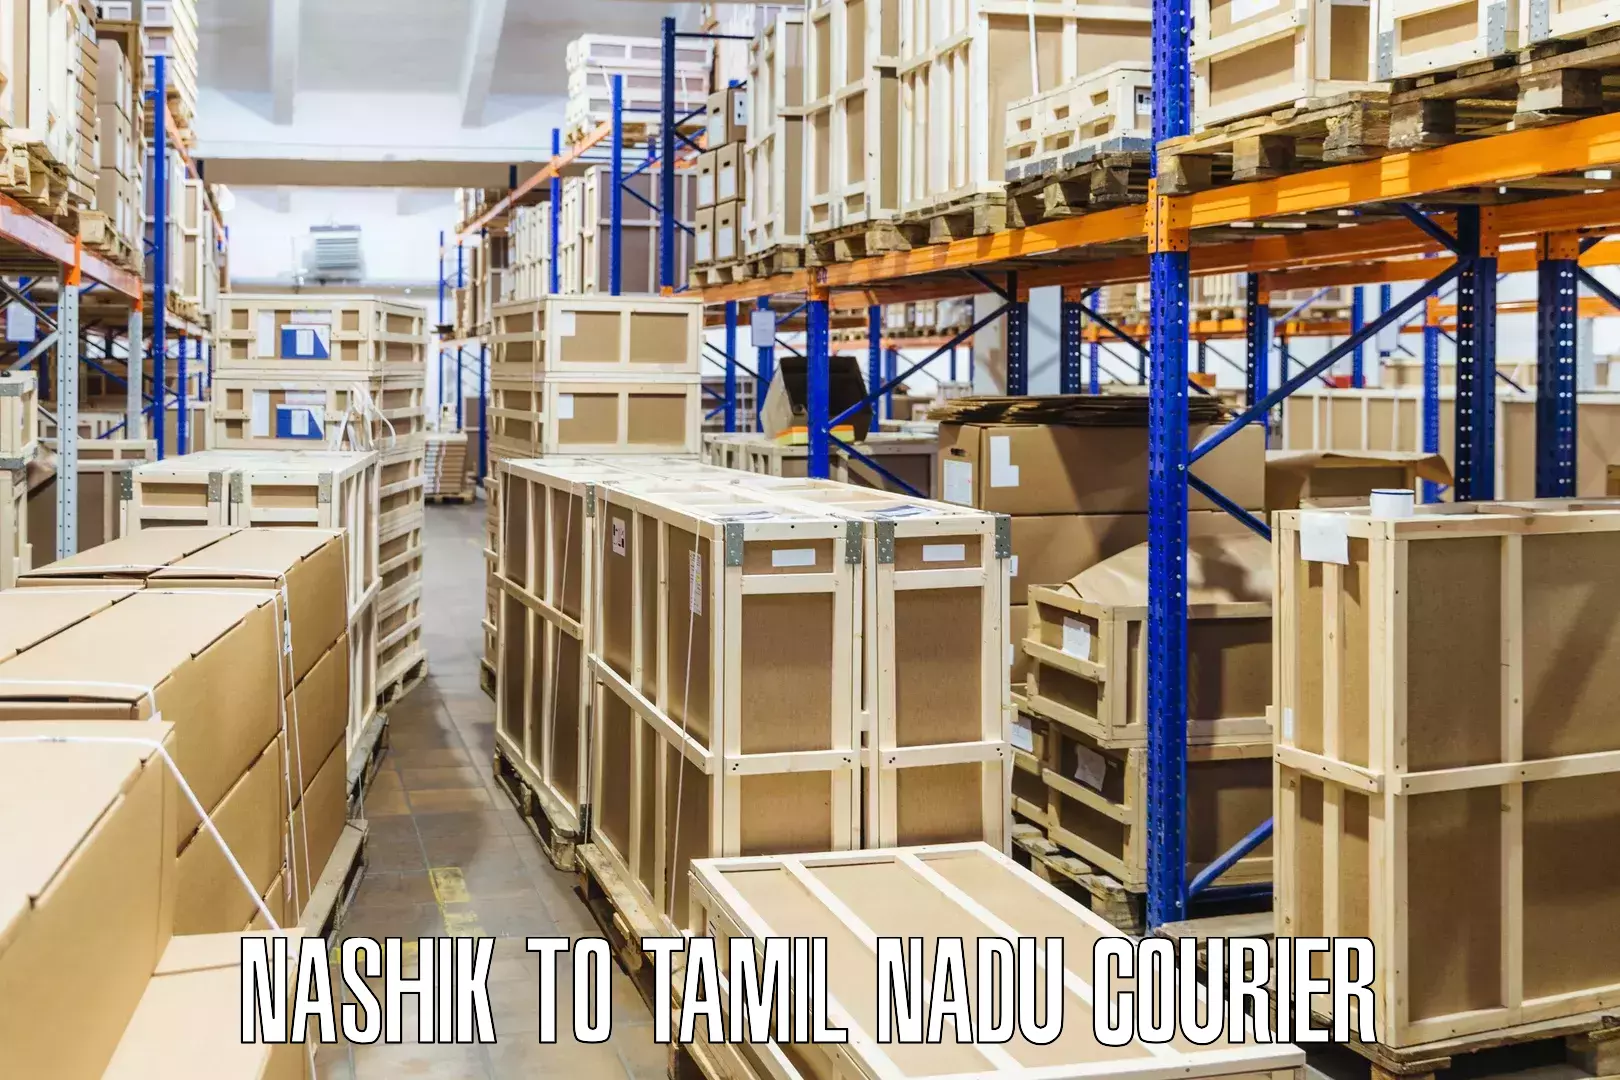 Express package services in Nashik to Tamil Nadu